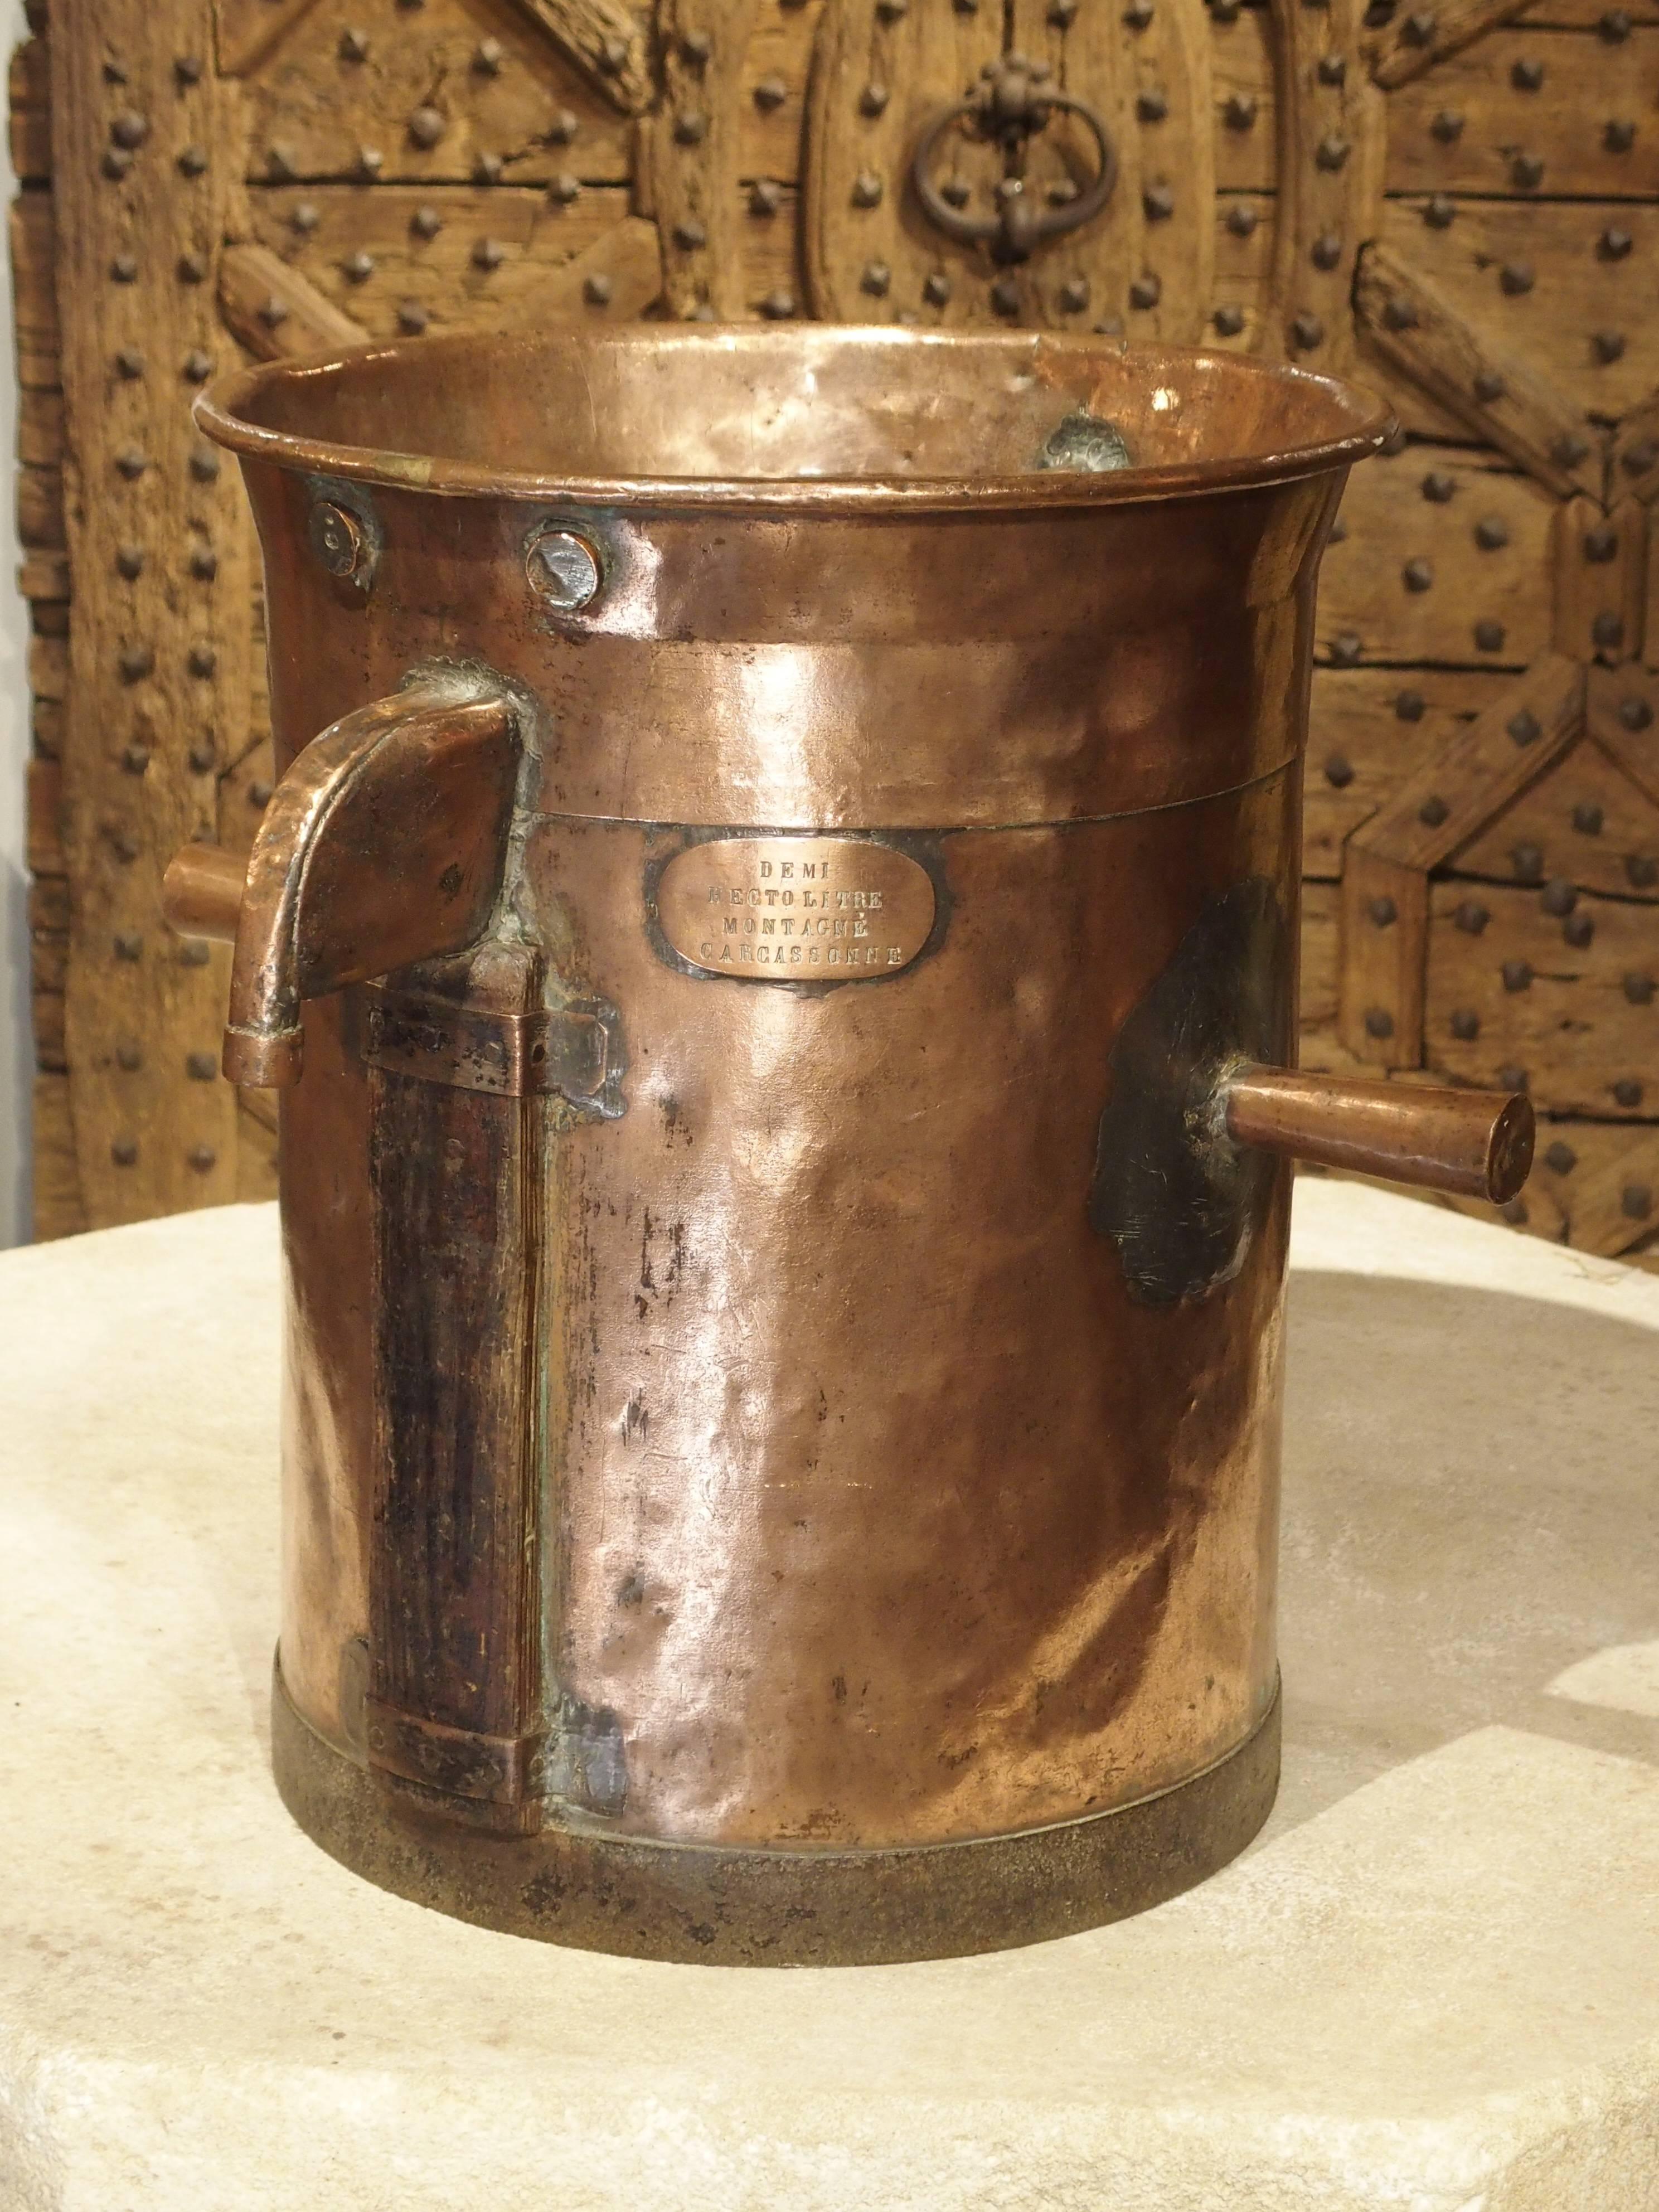 This beautiful copper object was a measuring and dispensing device used by a French wine producer circa 1850. The capacity is 50 liters and it is stamped with the name Montagne Carcassonne. This Community of vineyards, with a rich wine making